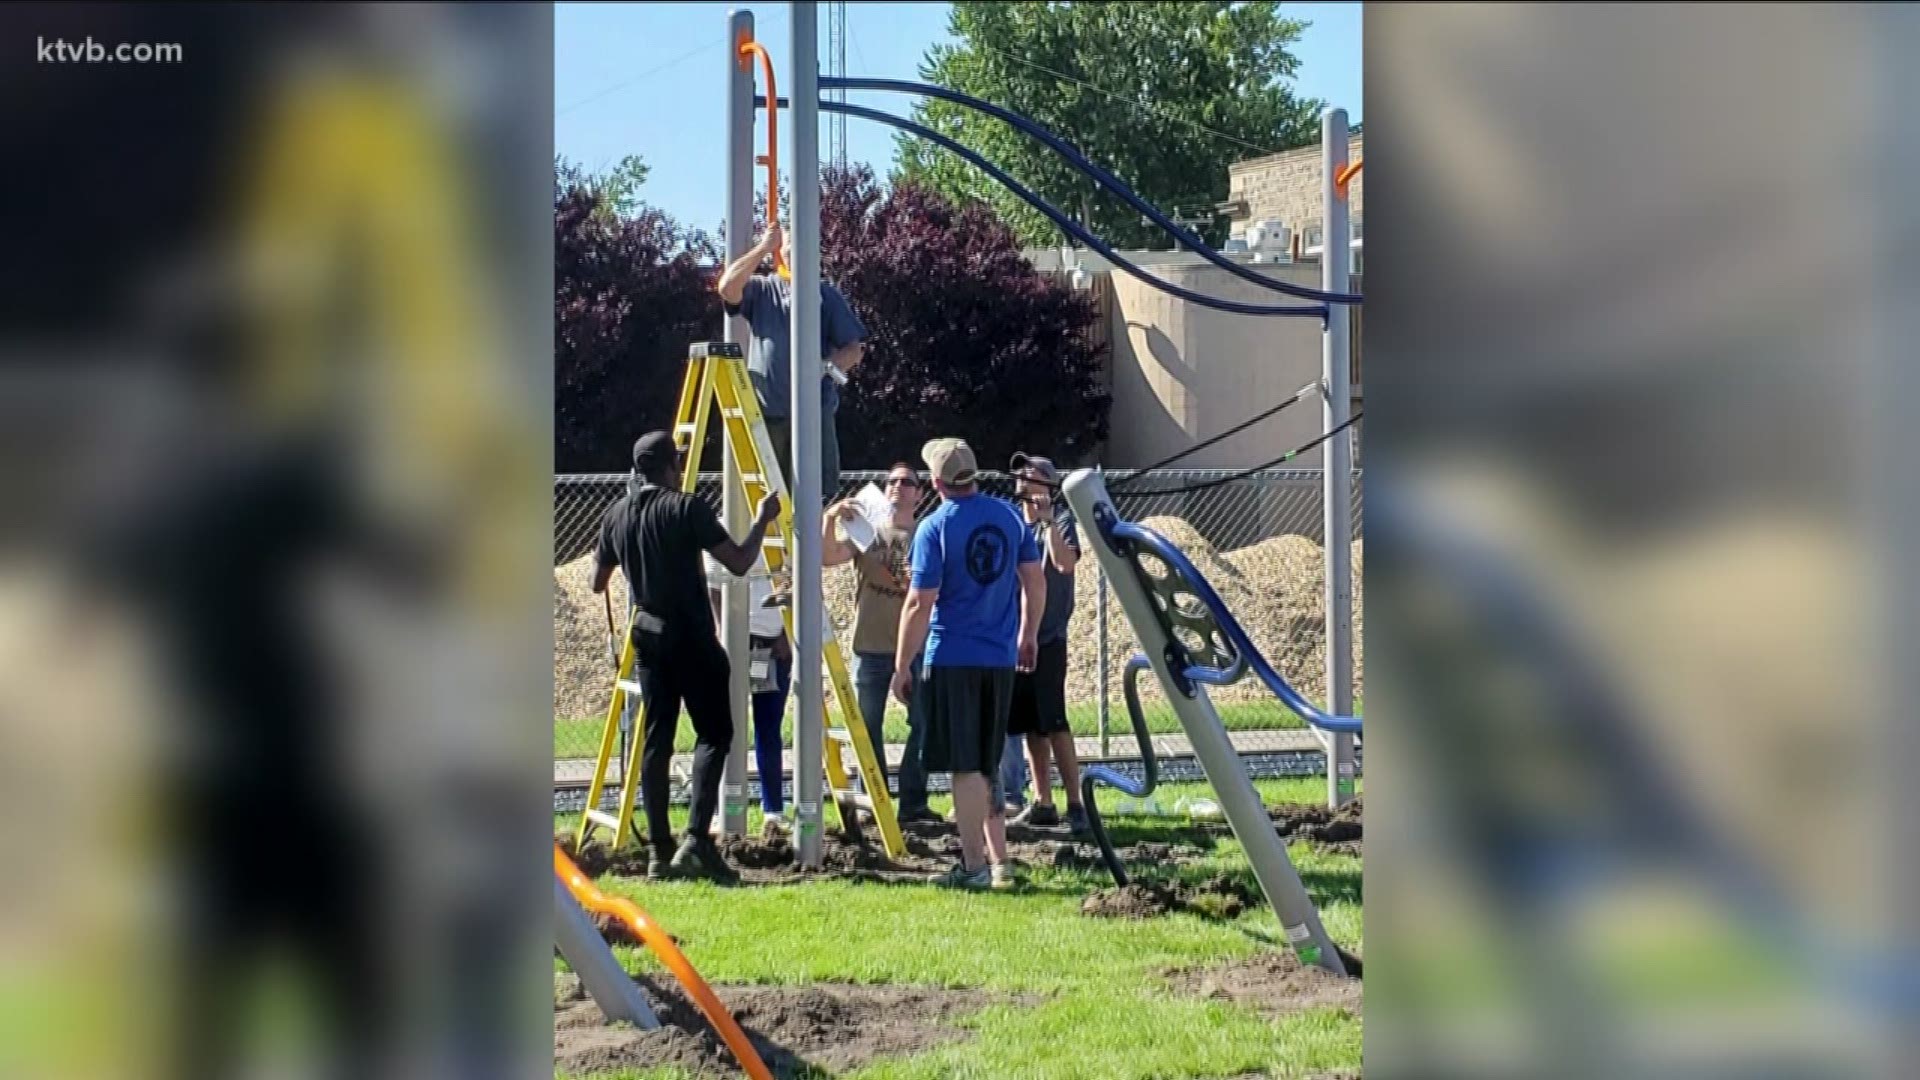 More than 90 unexpected volunteers helped build the first-ever playground at a middle school in Mountain Home on Saturday. Officials say they were only expecting about a dozen people to help build the playground, but once word got out about the projects, nearly 100 people came out to help, including a local football team.